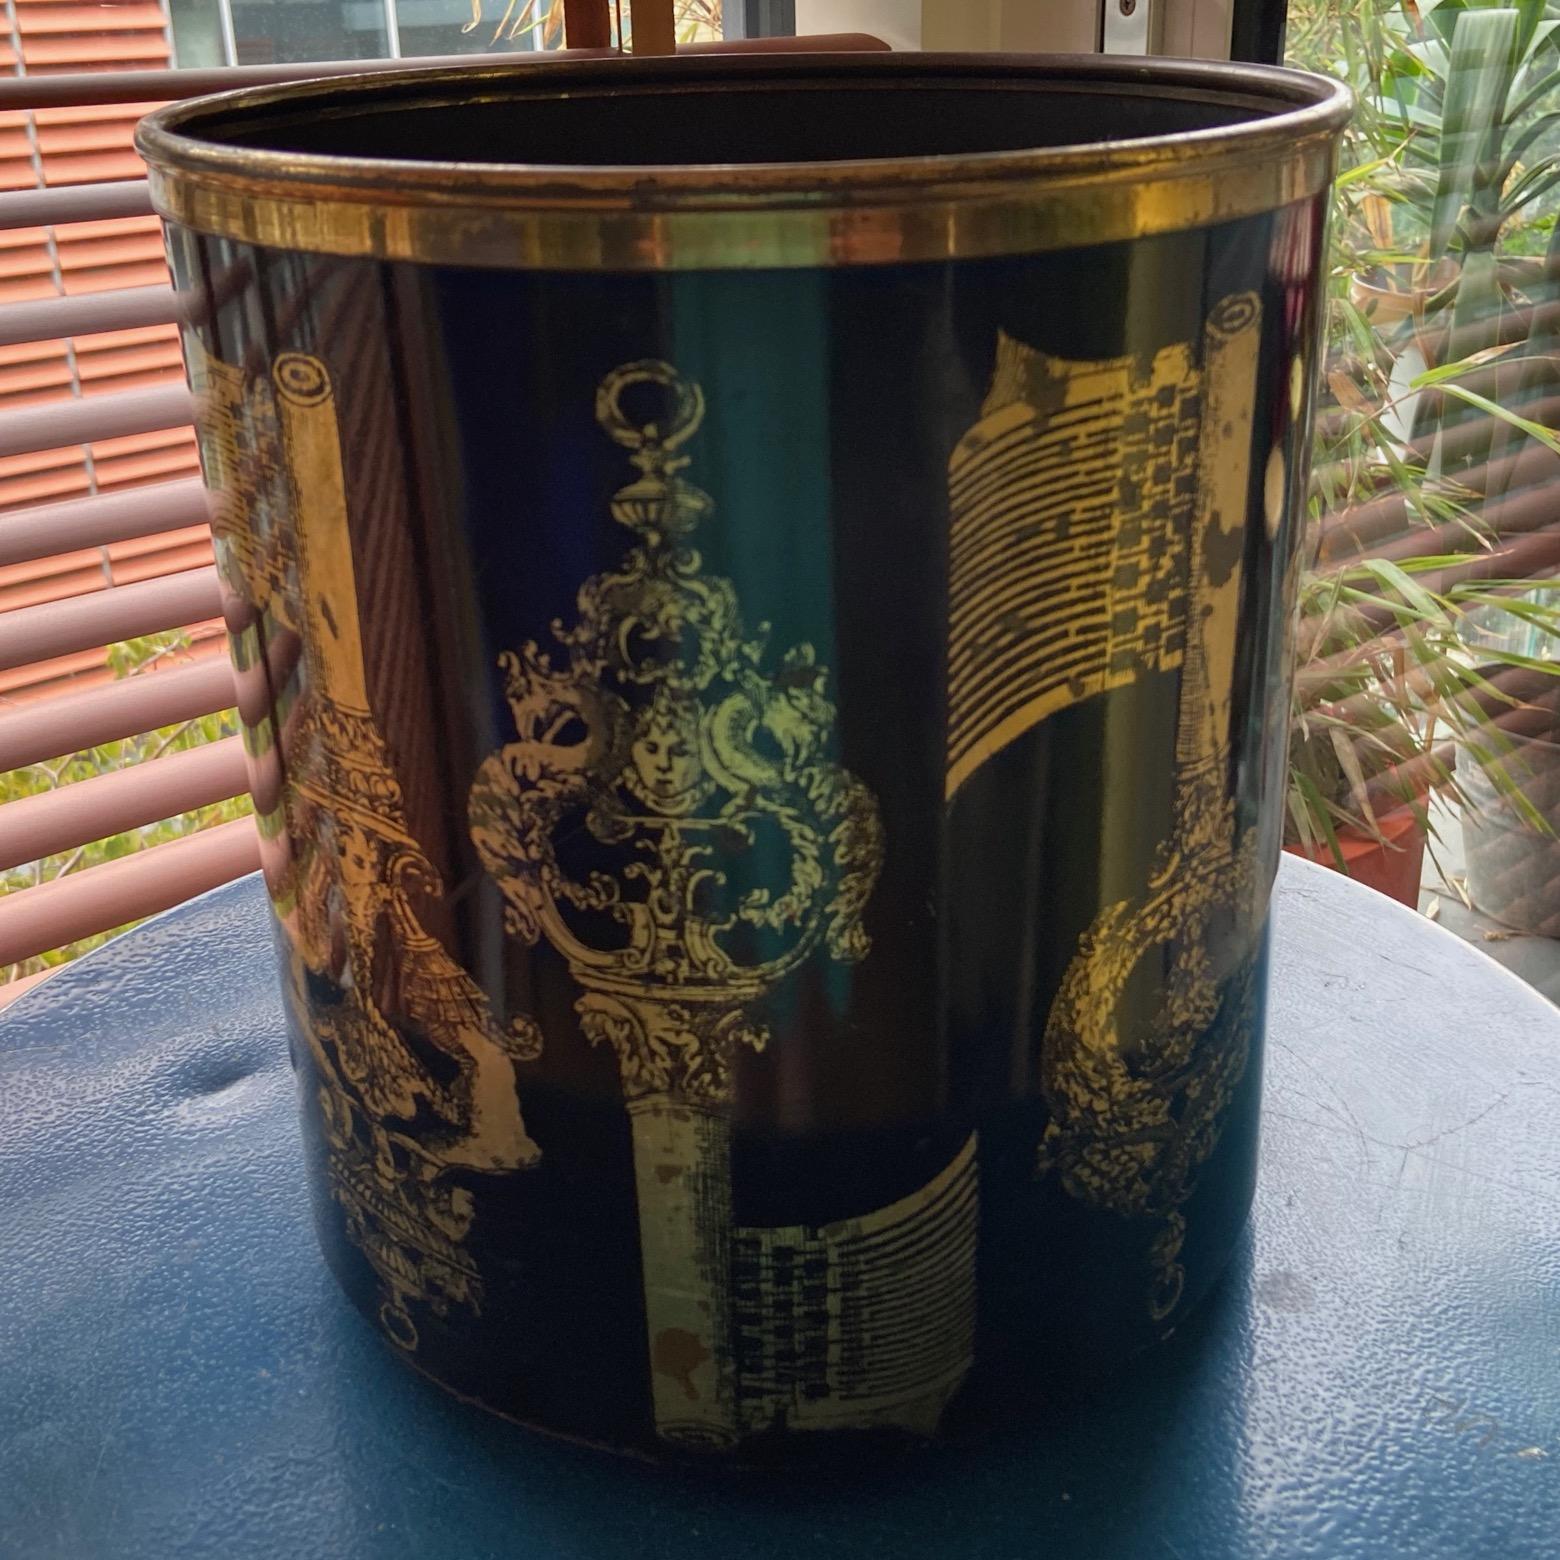 Piero Fornasetti 1950s Black and Gold Stencilled Key Design Paper Waste Basket For Sale 6